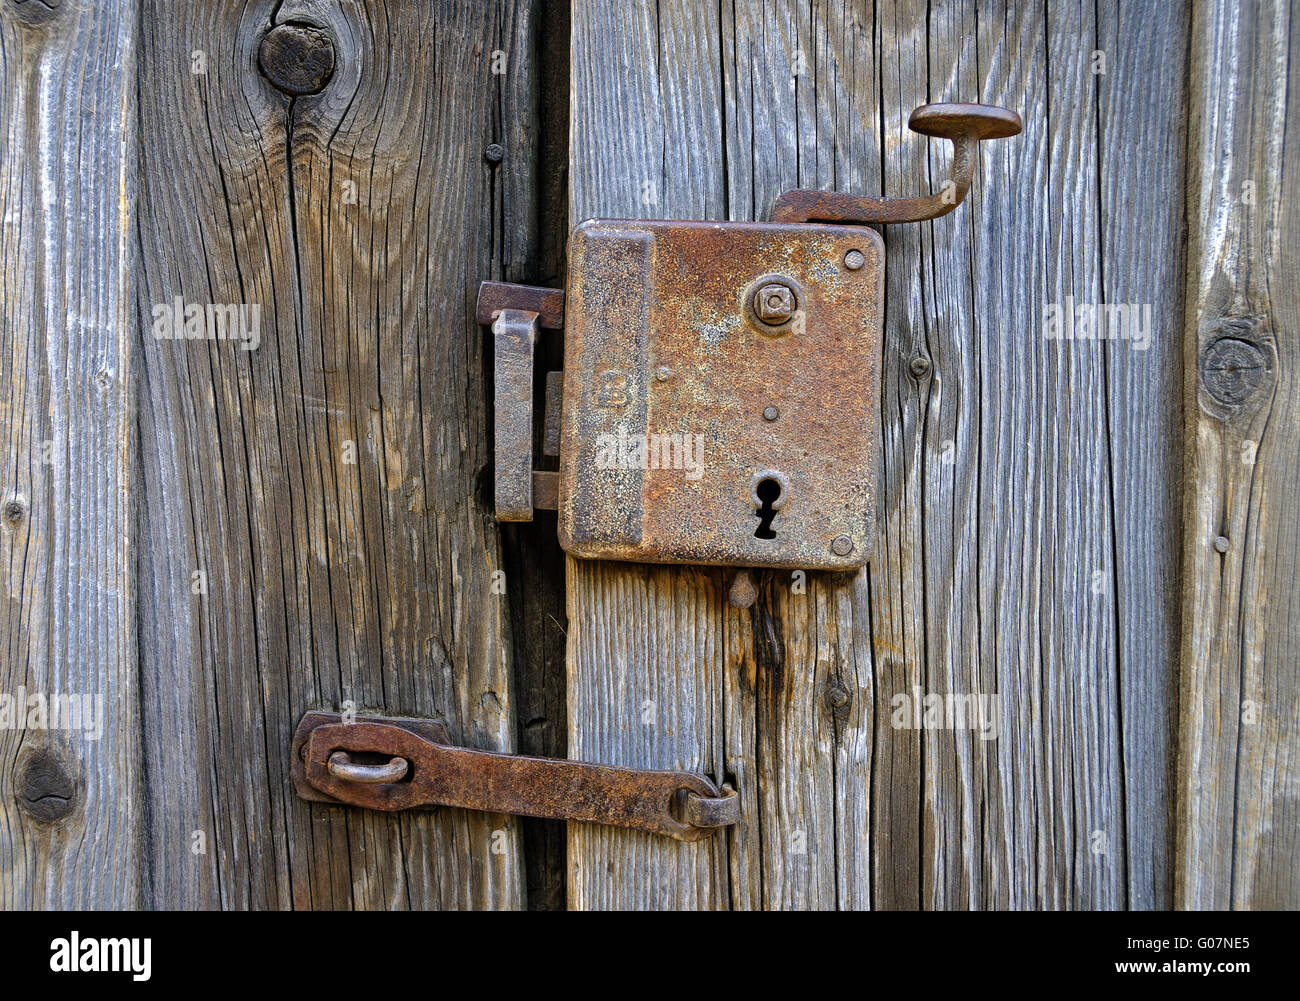 old and rusty lock on an old wooden barn door Stock Photo